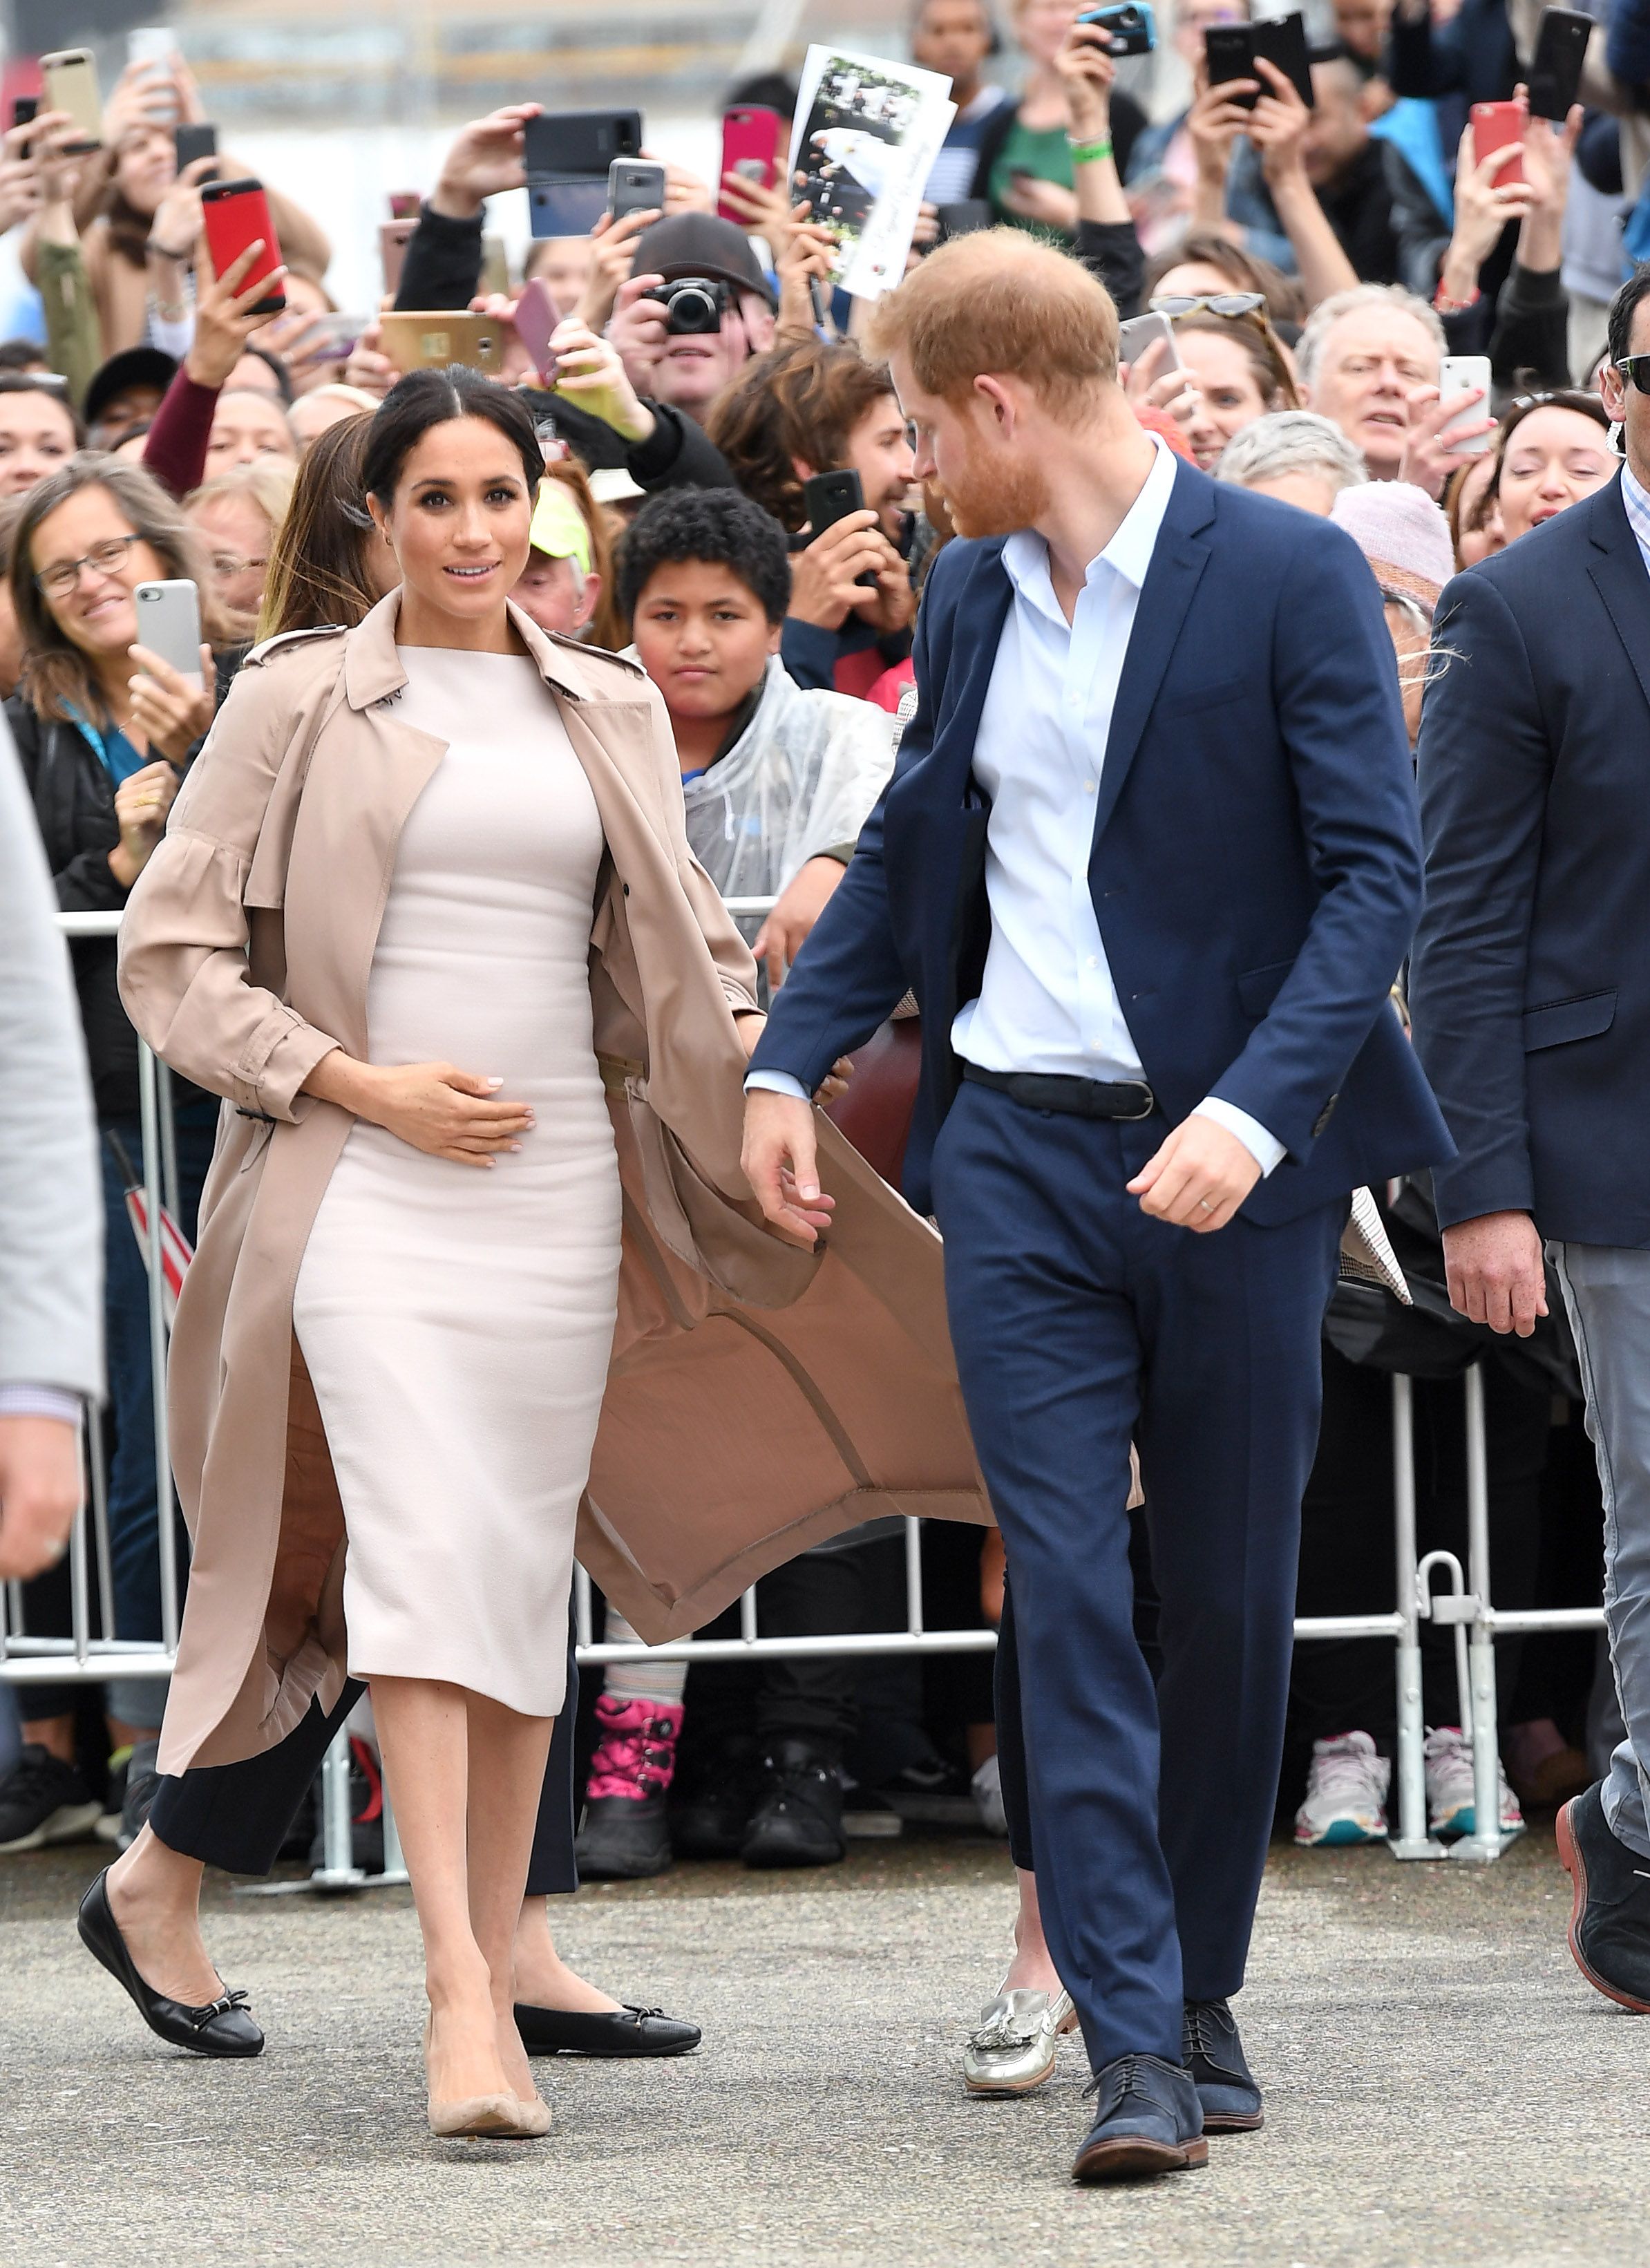 https://hips.hearstapps.com/hmg-prod/images/meghan-duchess-of-sussex-and-prince-harry-duke-of-sussex-news-photo-1055348418-1540892140.jpg